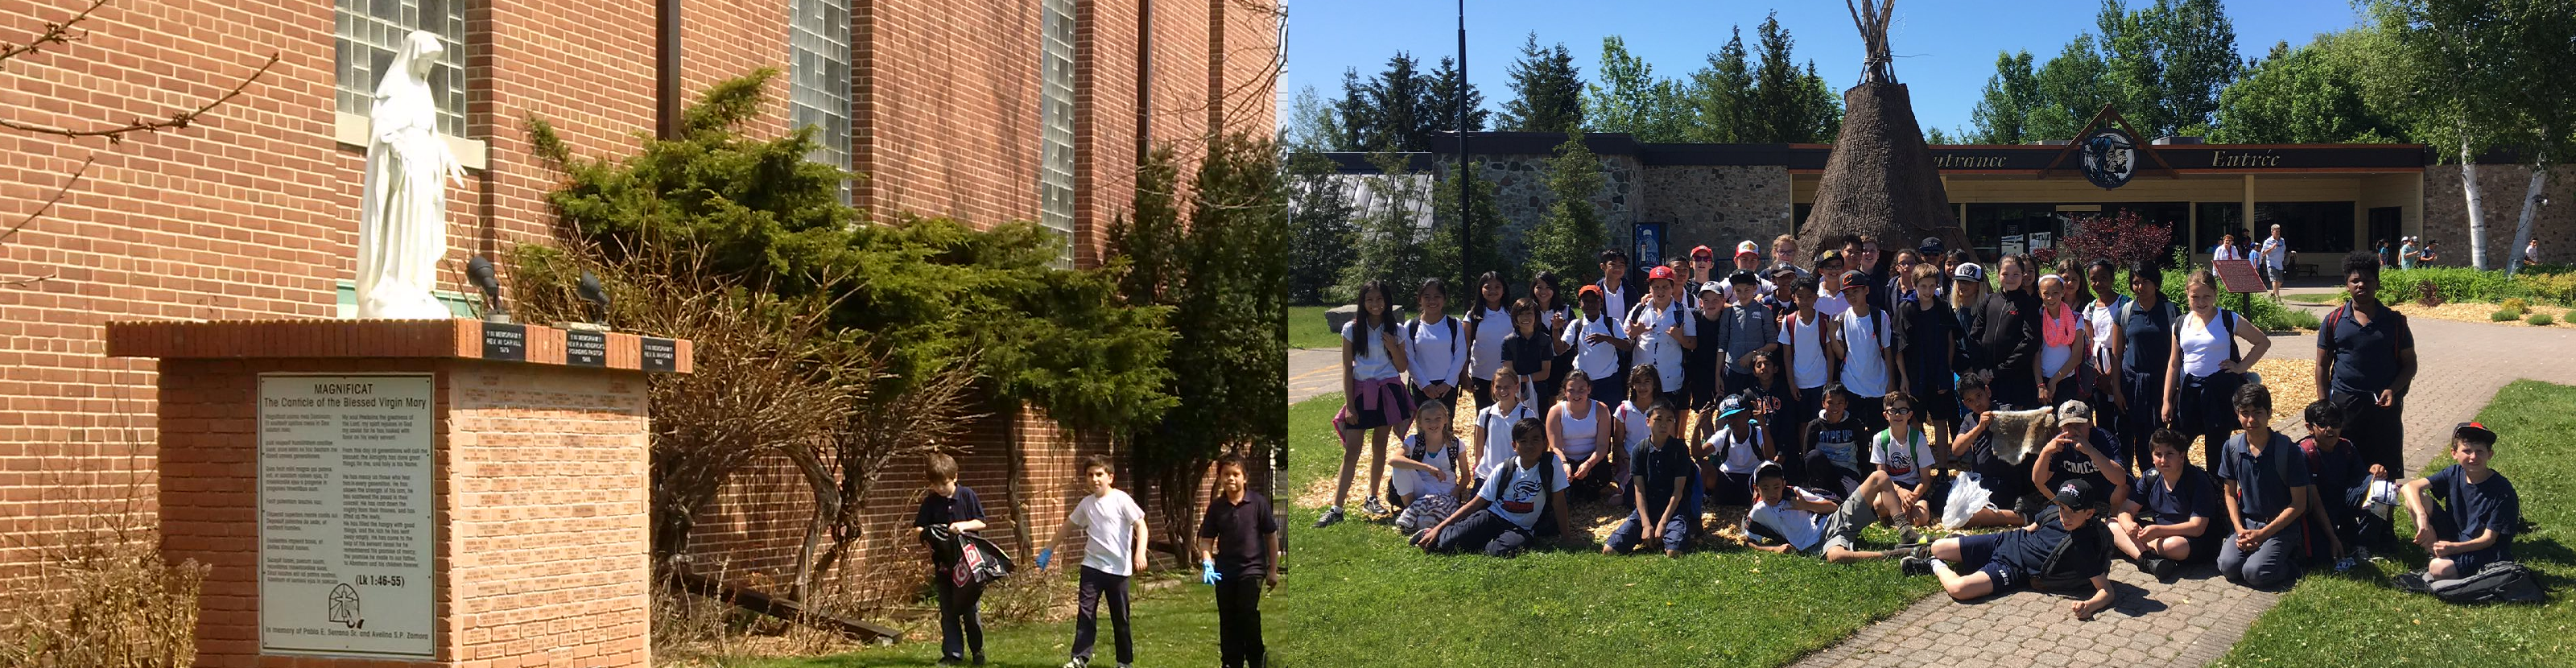 Left is a picture of Canadian Martyrs parish with students cleaning up the grounds. Right is a group picture of Canadian Martyrs students on a field trip.